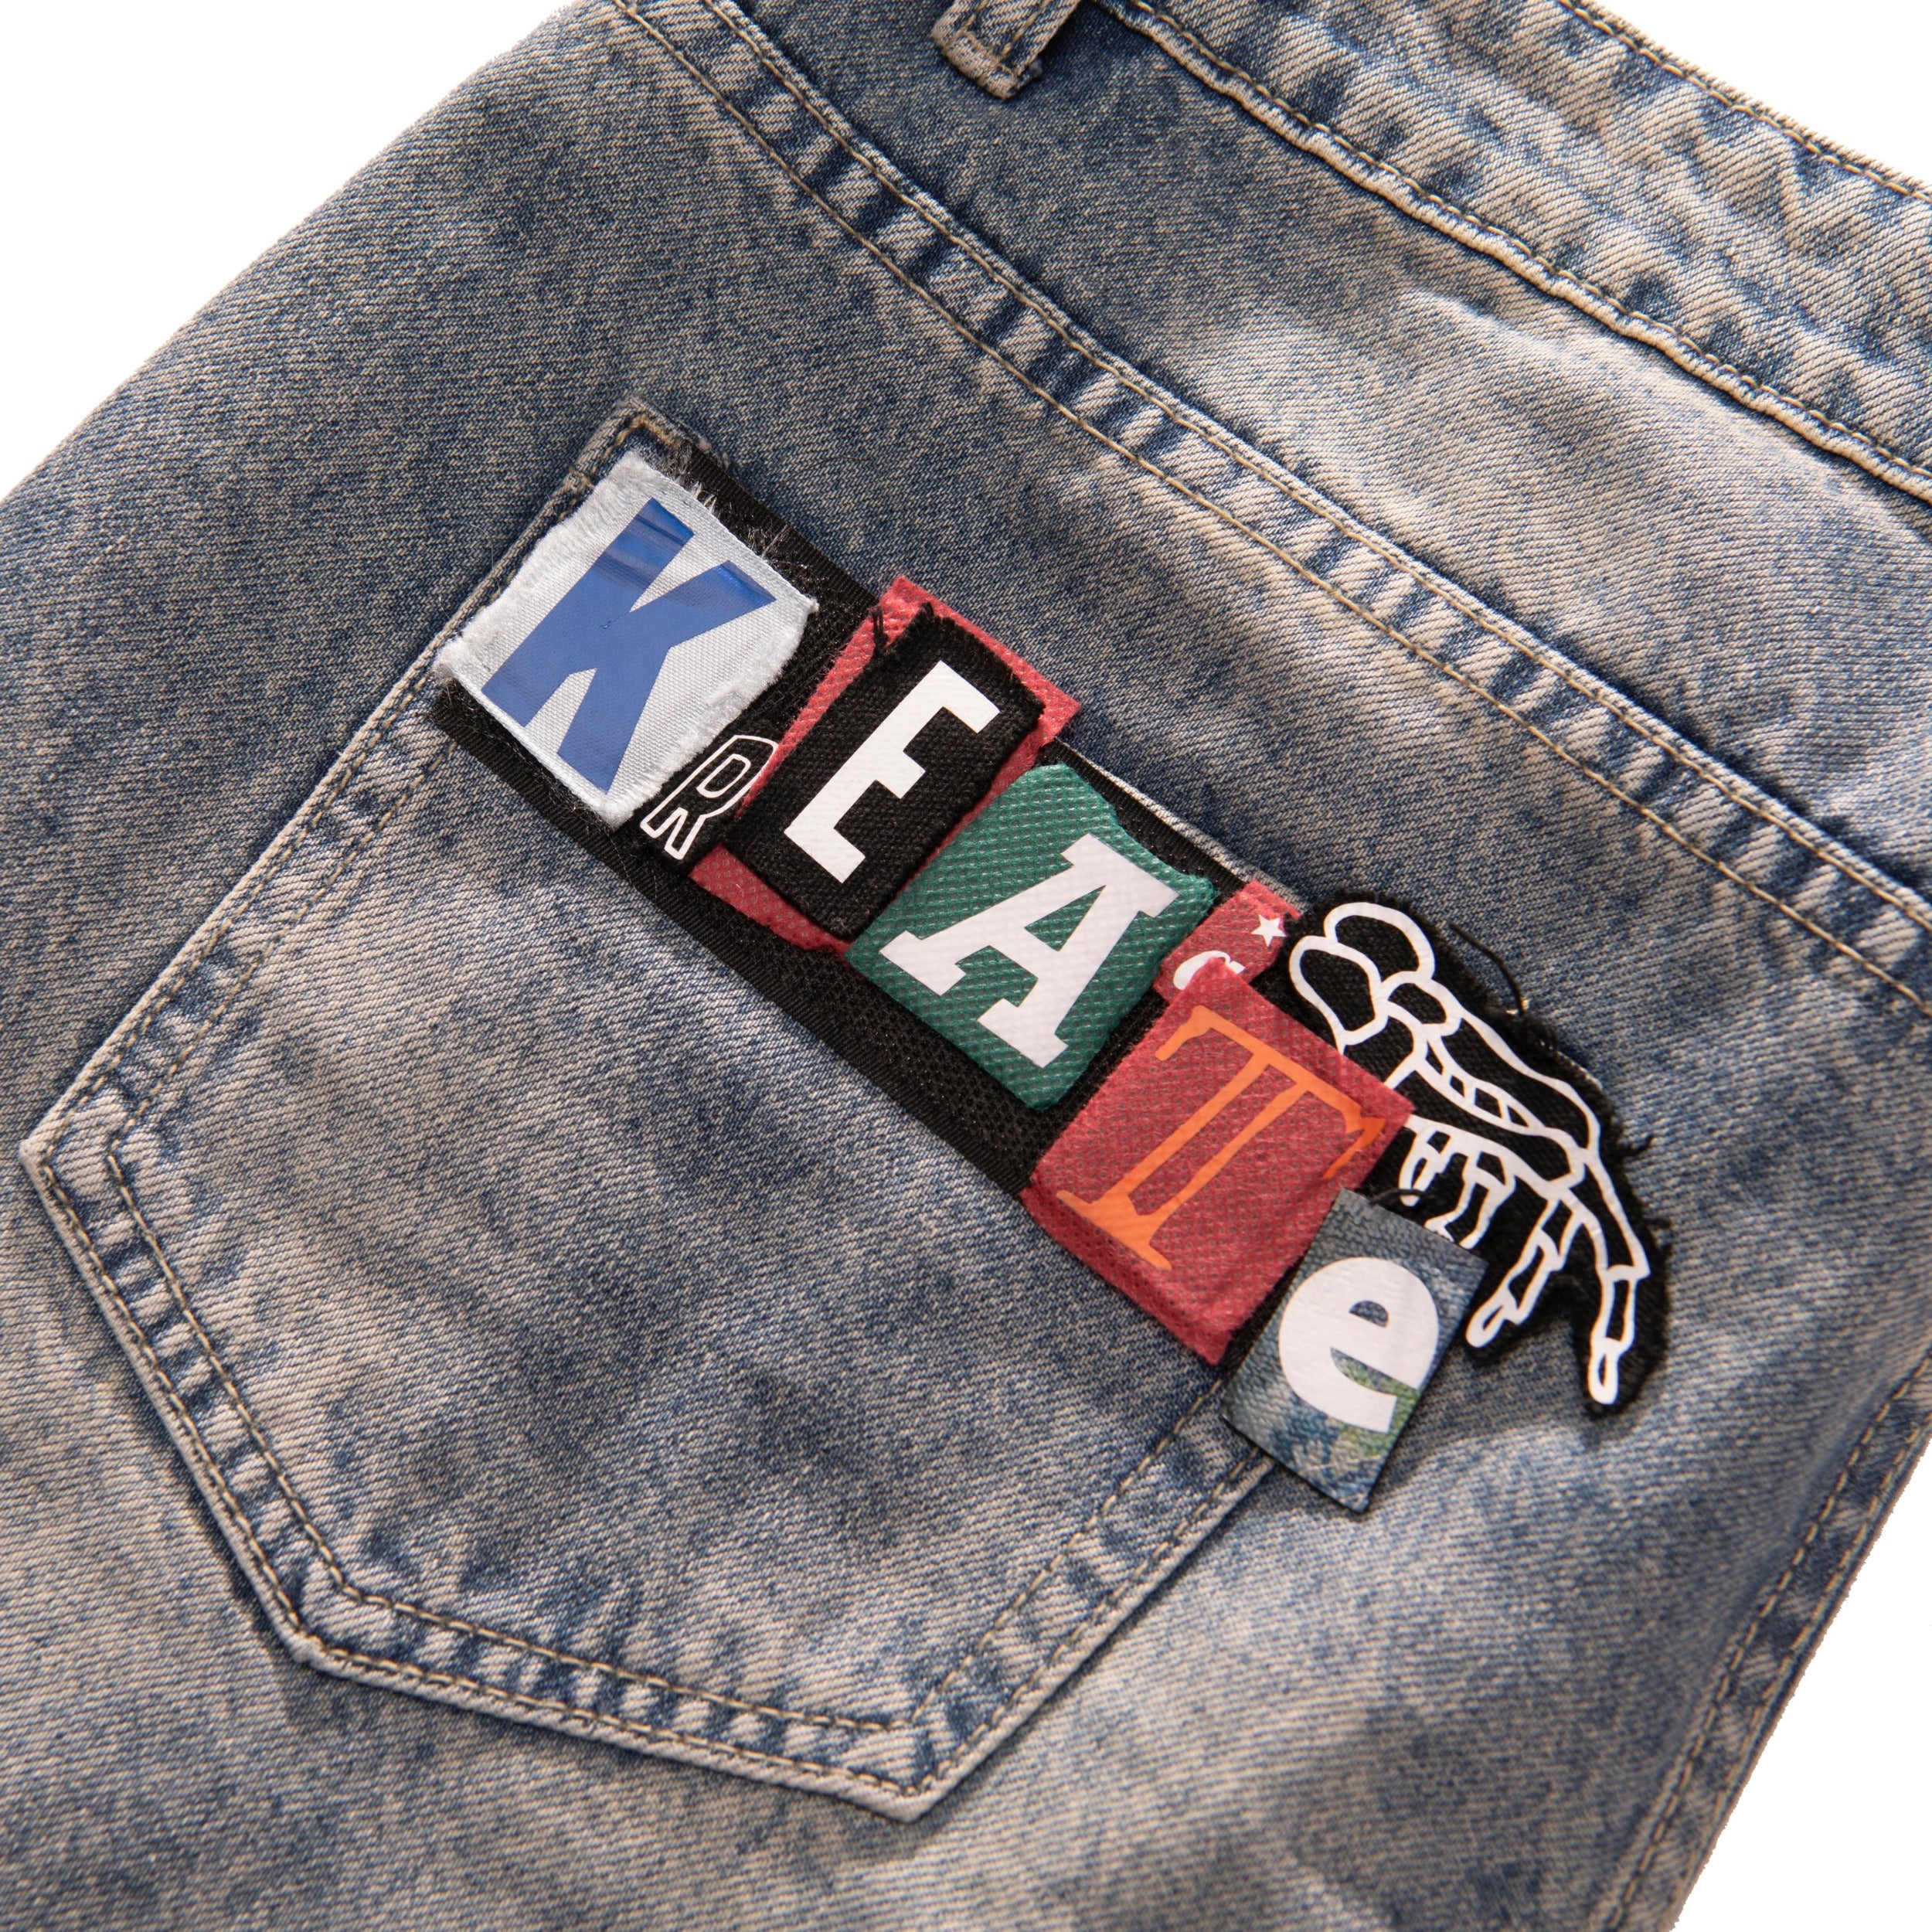 KREATE, WASHED DENIM FLARED PANTS - VELKRO PATCHES - KREATE